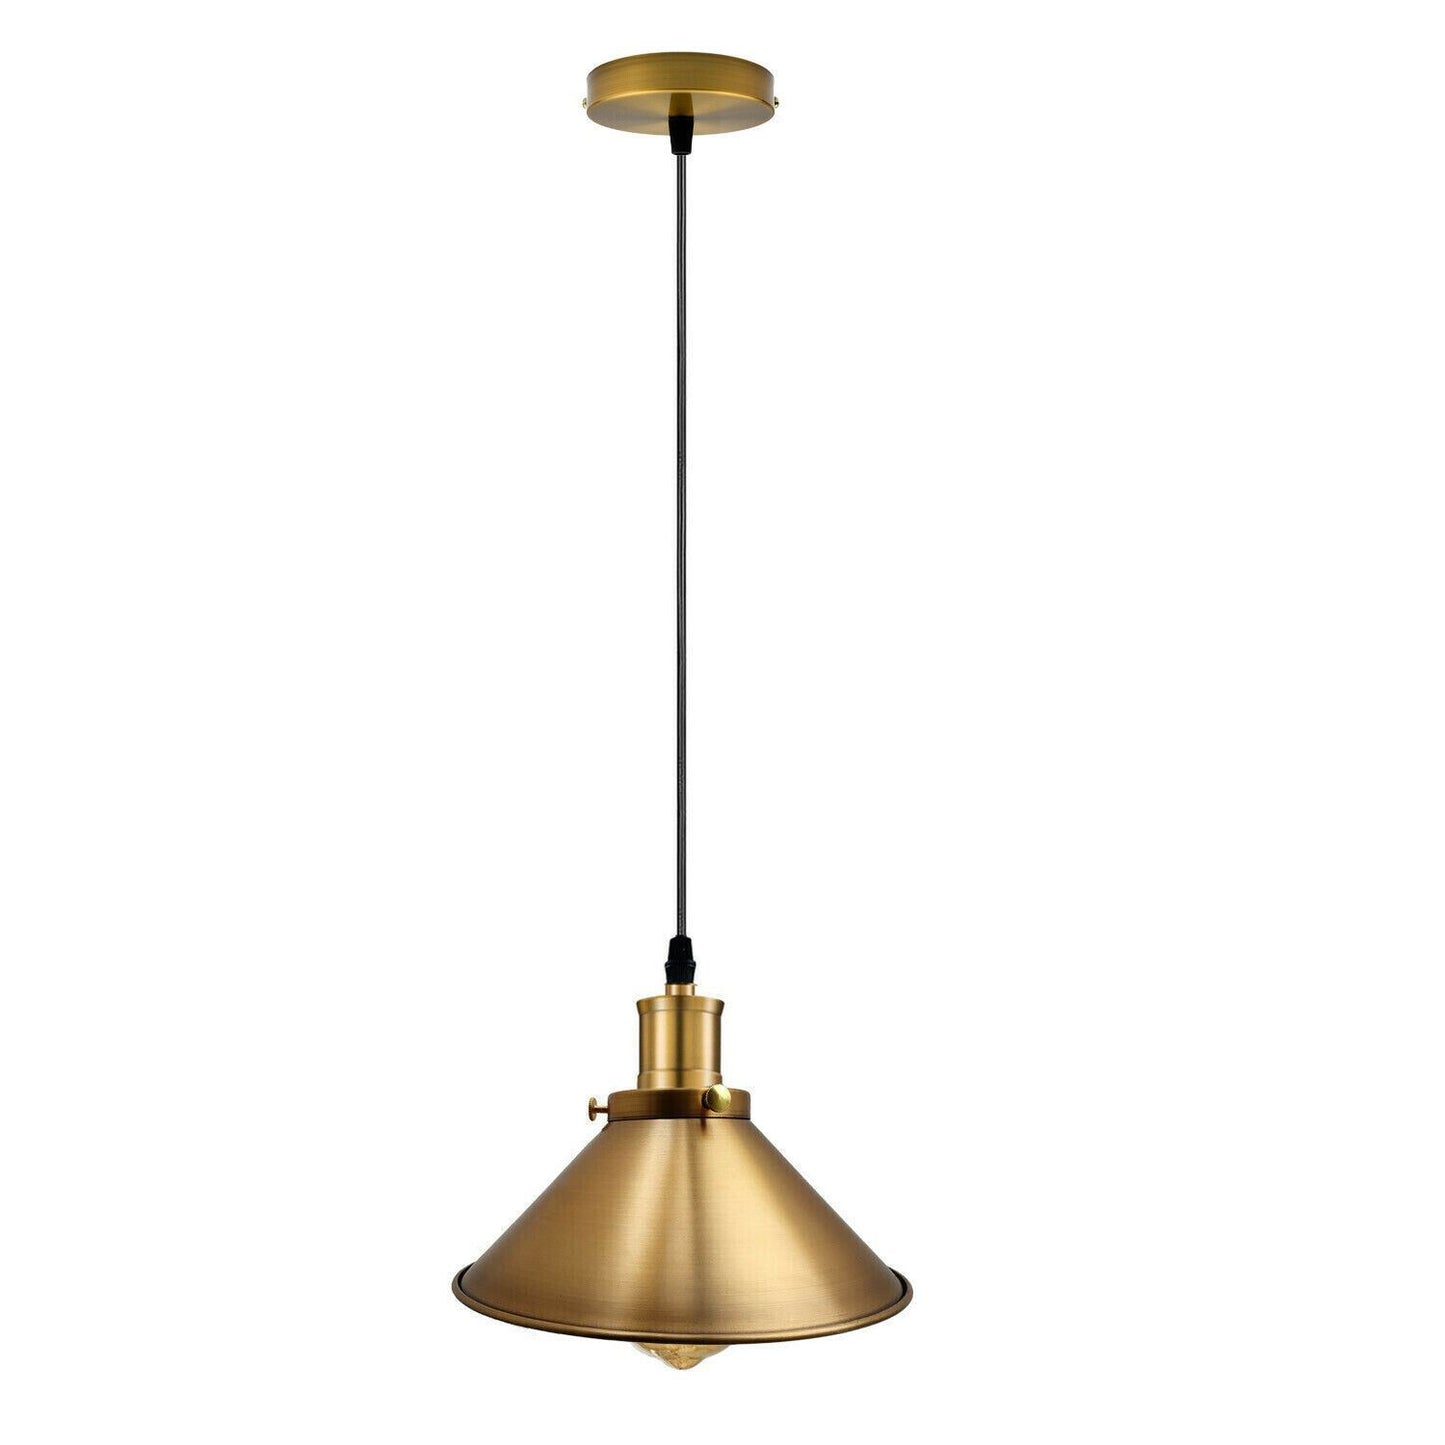 Modern Industrial Style Metal Cage Single Pendant Light Yellow brass Ceiling Light Fixture~2120